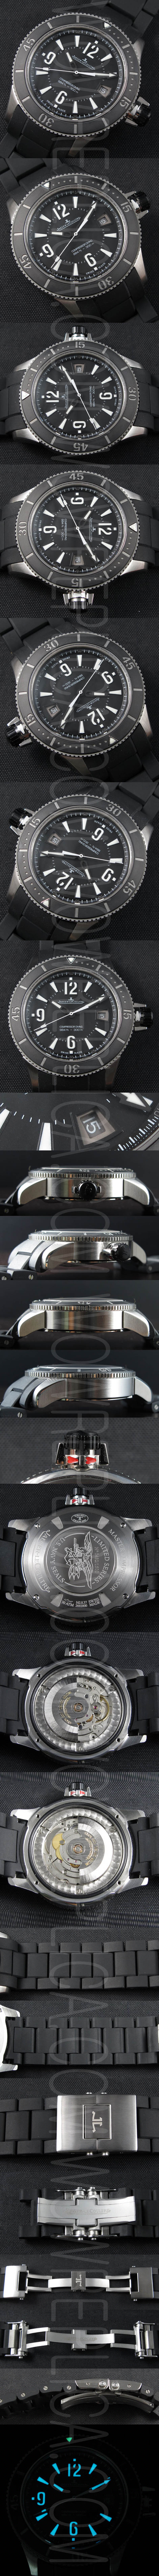 Replica Jaeger-LeCoultre  Watches